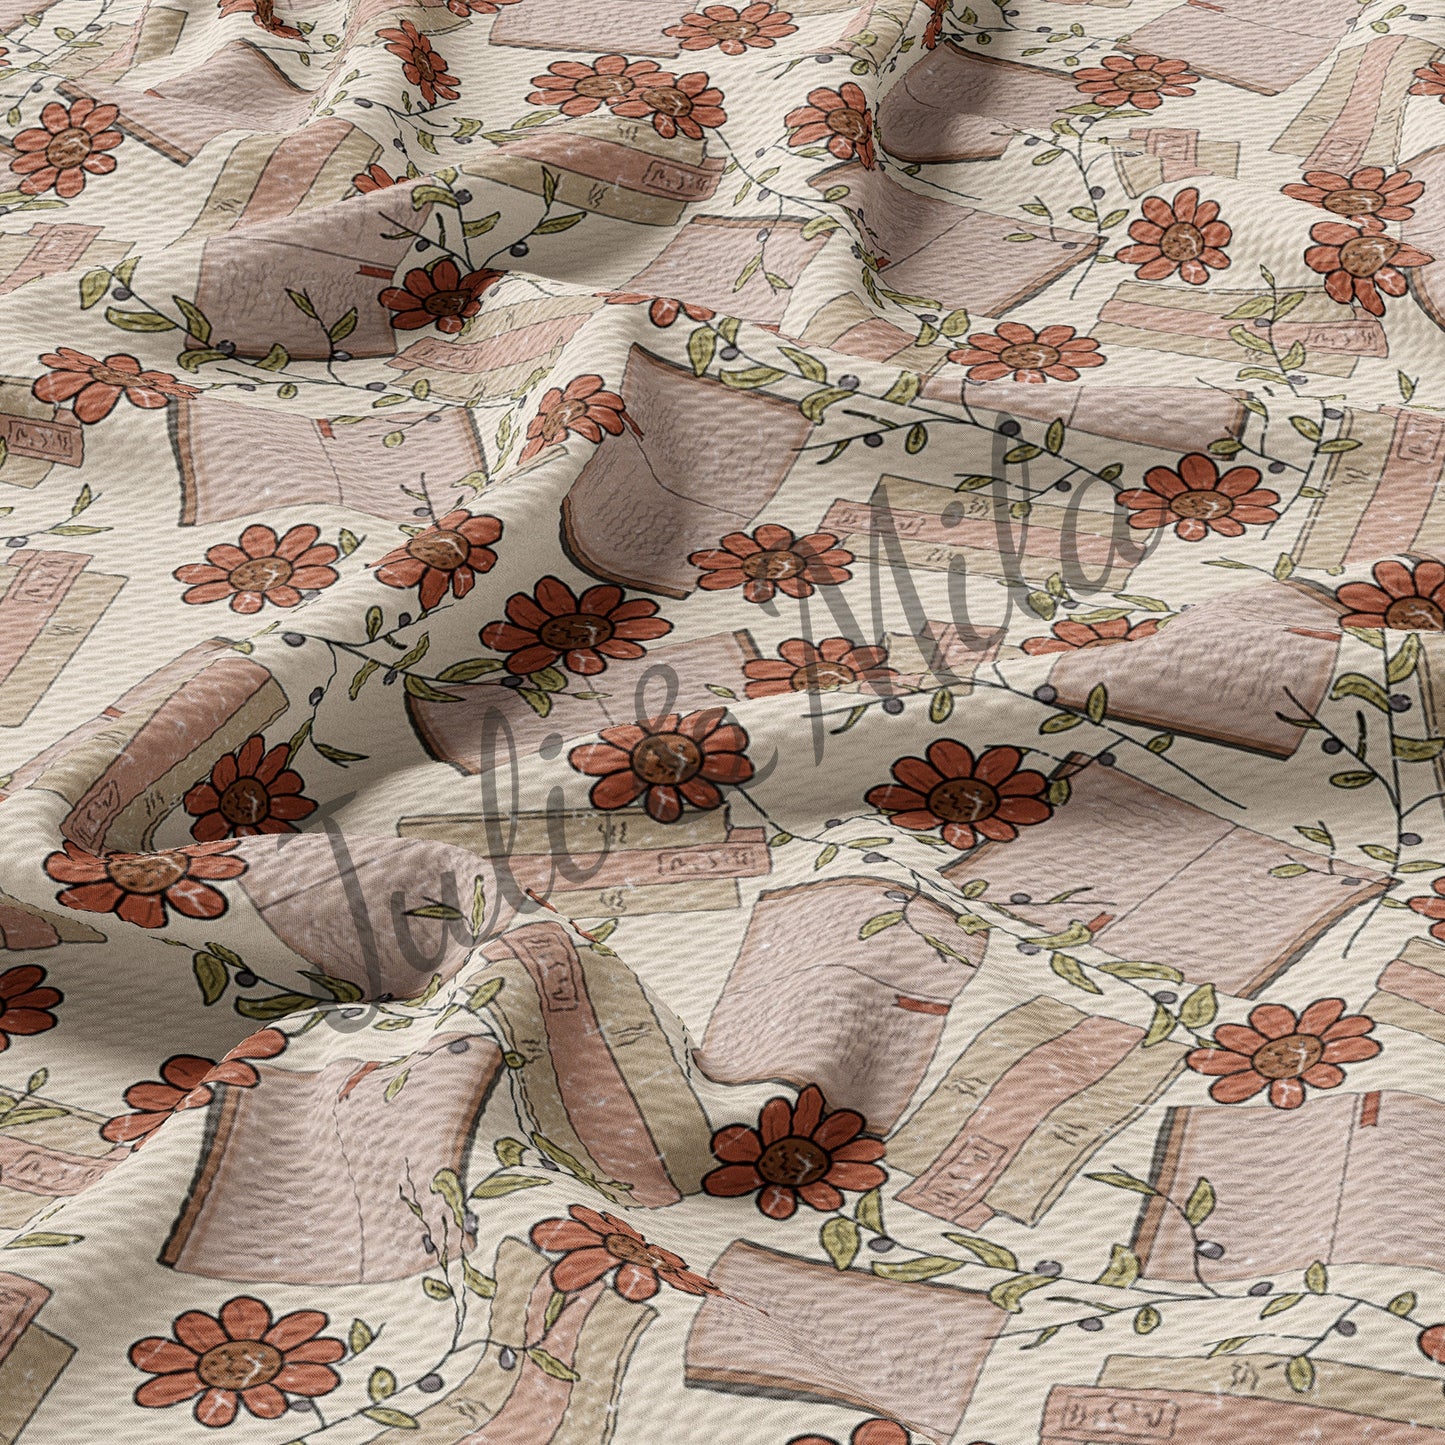 Bullet Textured Fabric Floral69